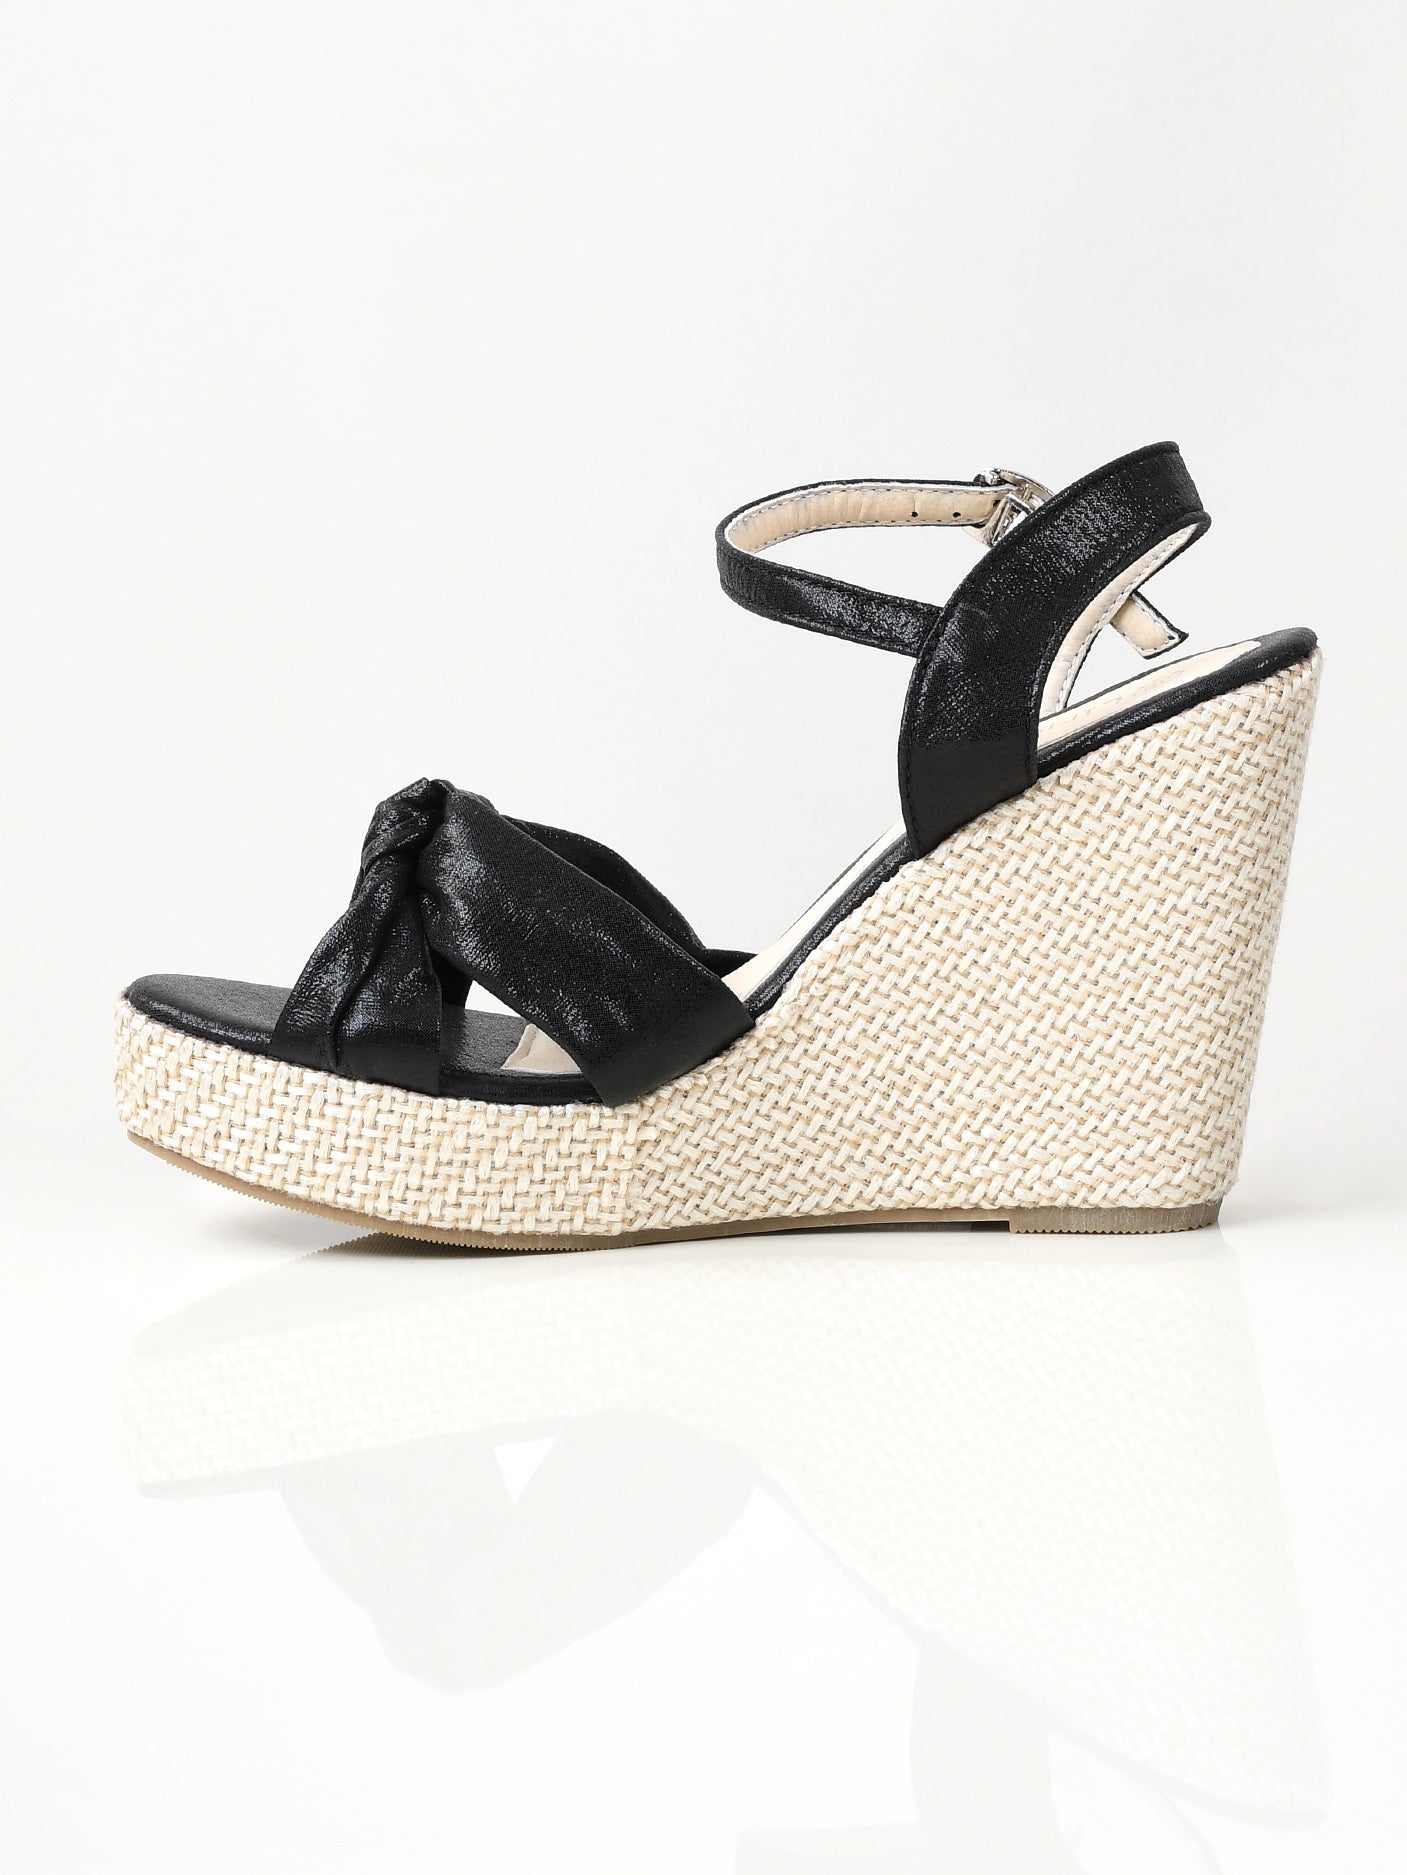 Shiny Knotted Wedges - Black